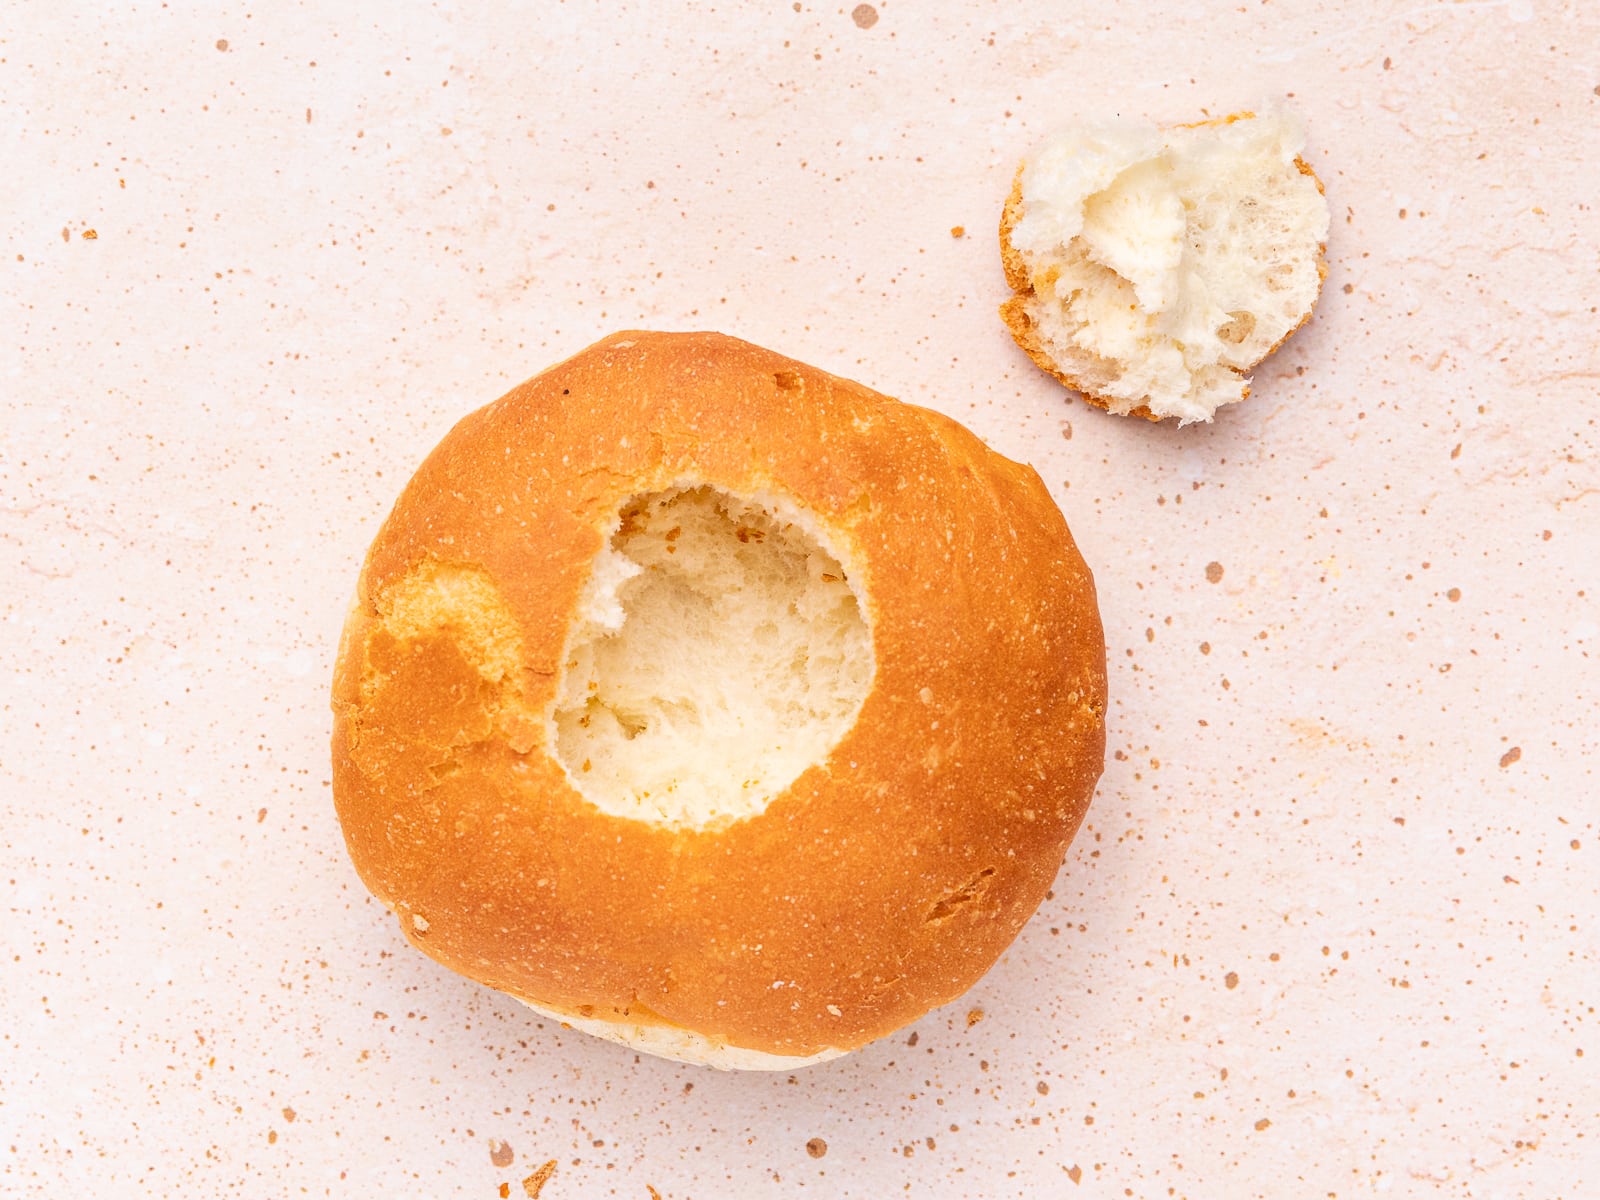 a bread roll with a hole cut out of the top